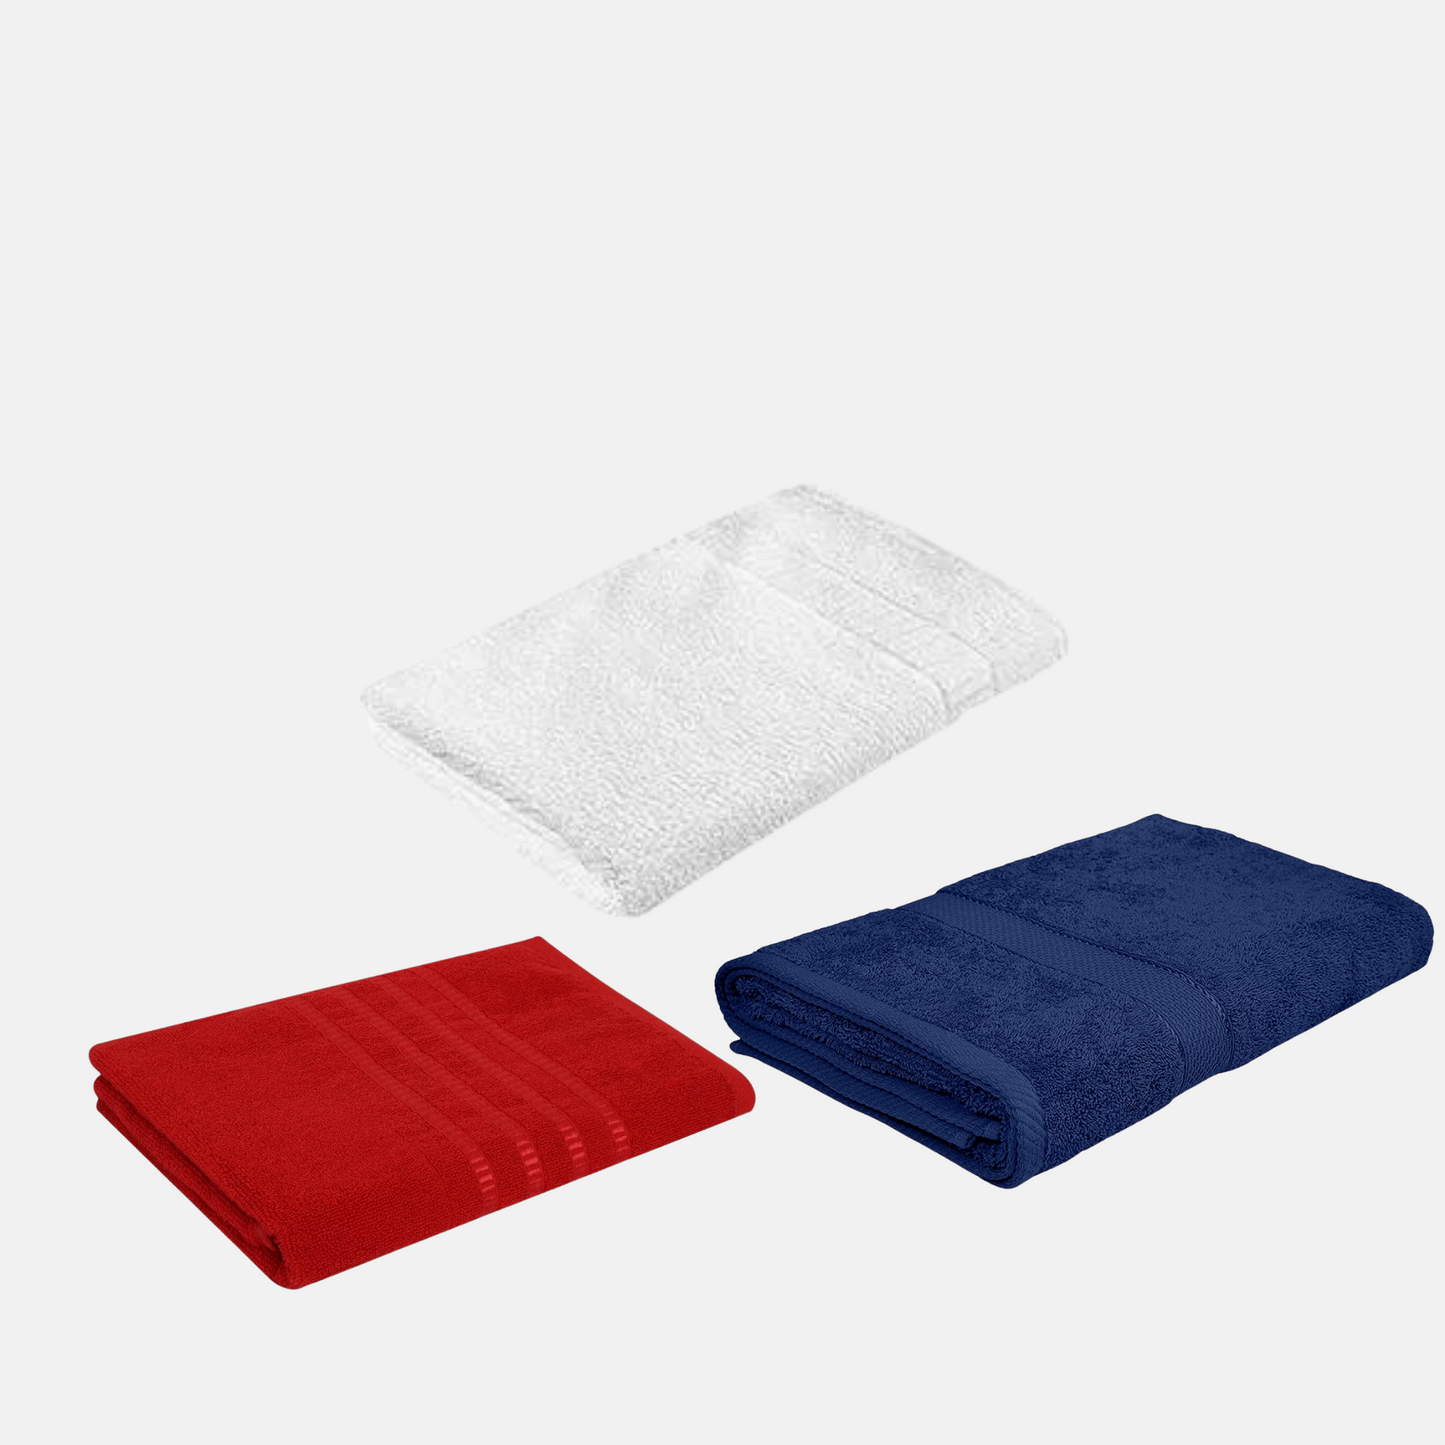 YOUTH ROBE Cotton 599 GSM Bath Towel - YOUTH ROBE